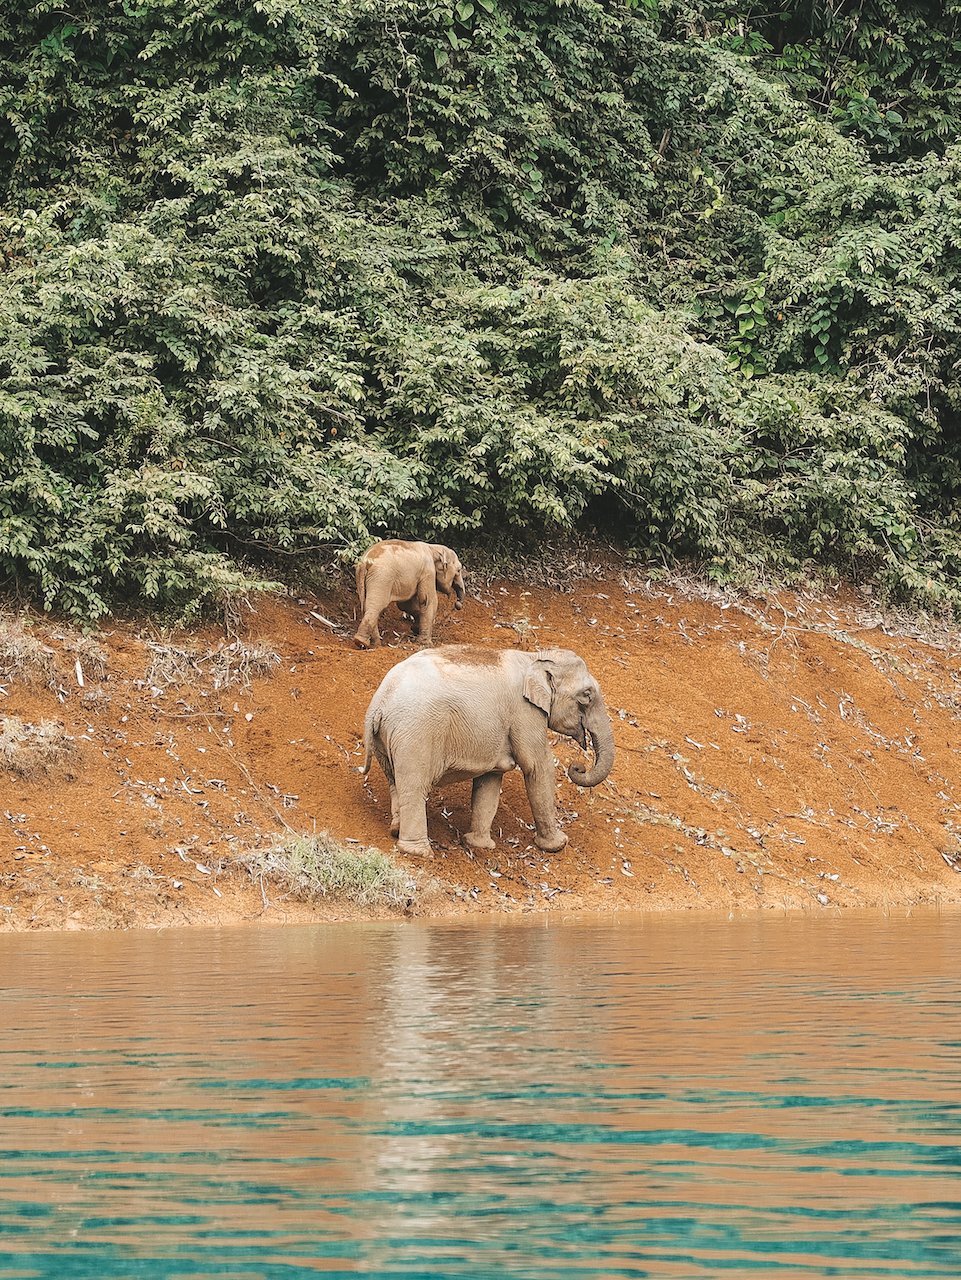 A mother elephant and baby feeding by the water - Khao Sok National Park - Thailand